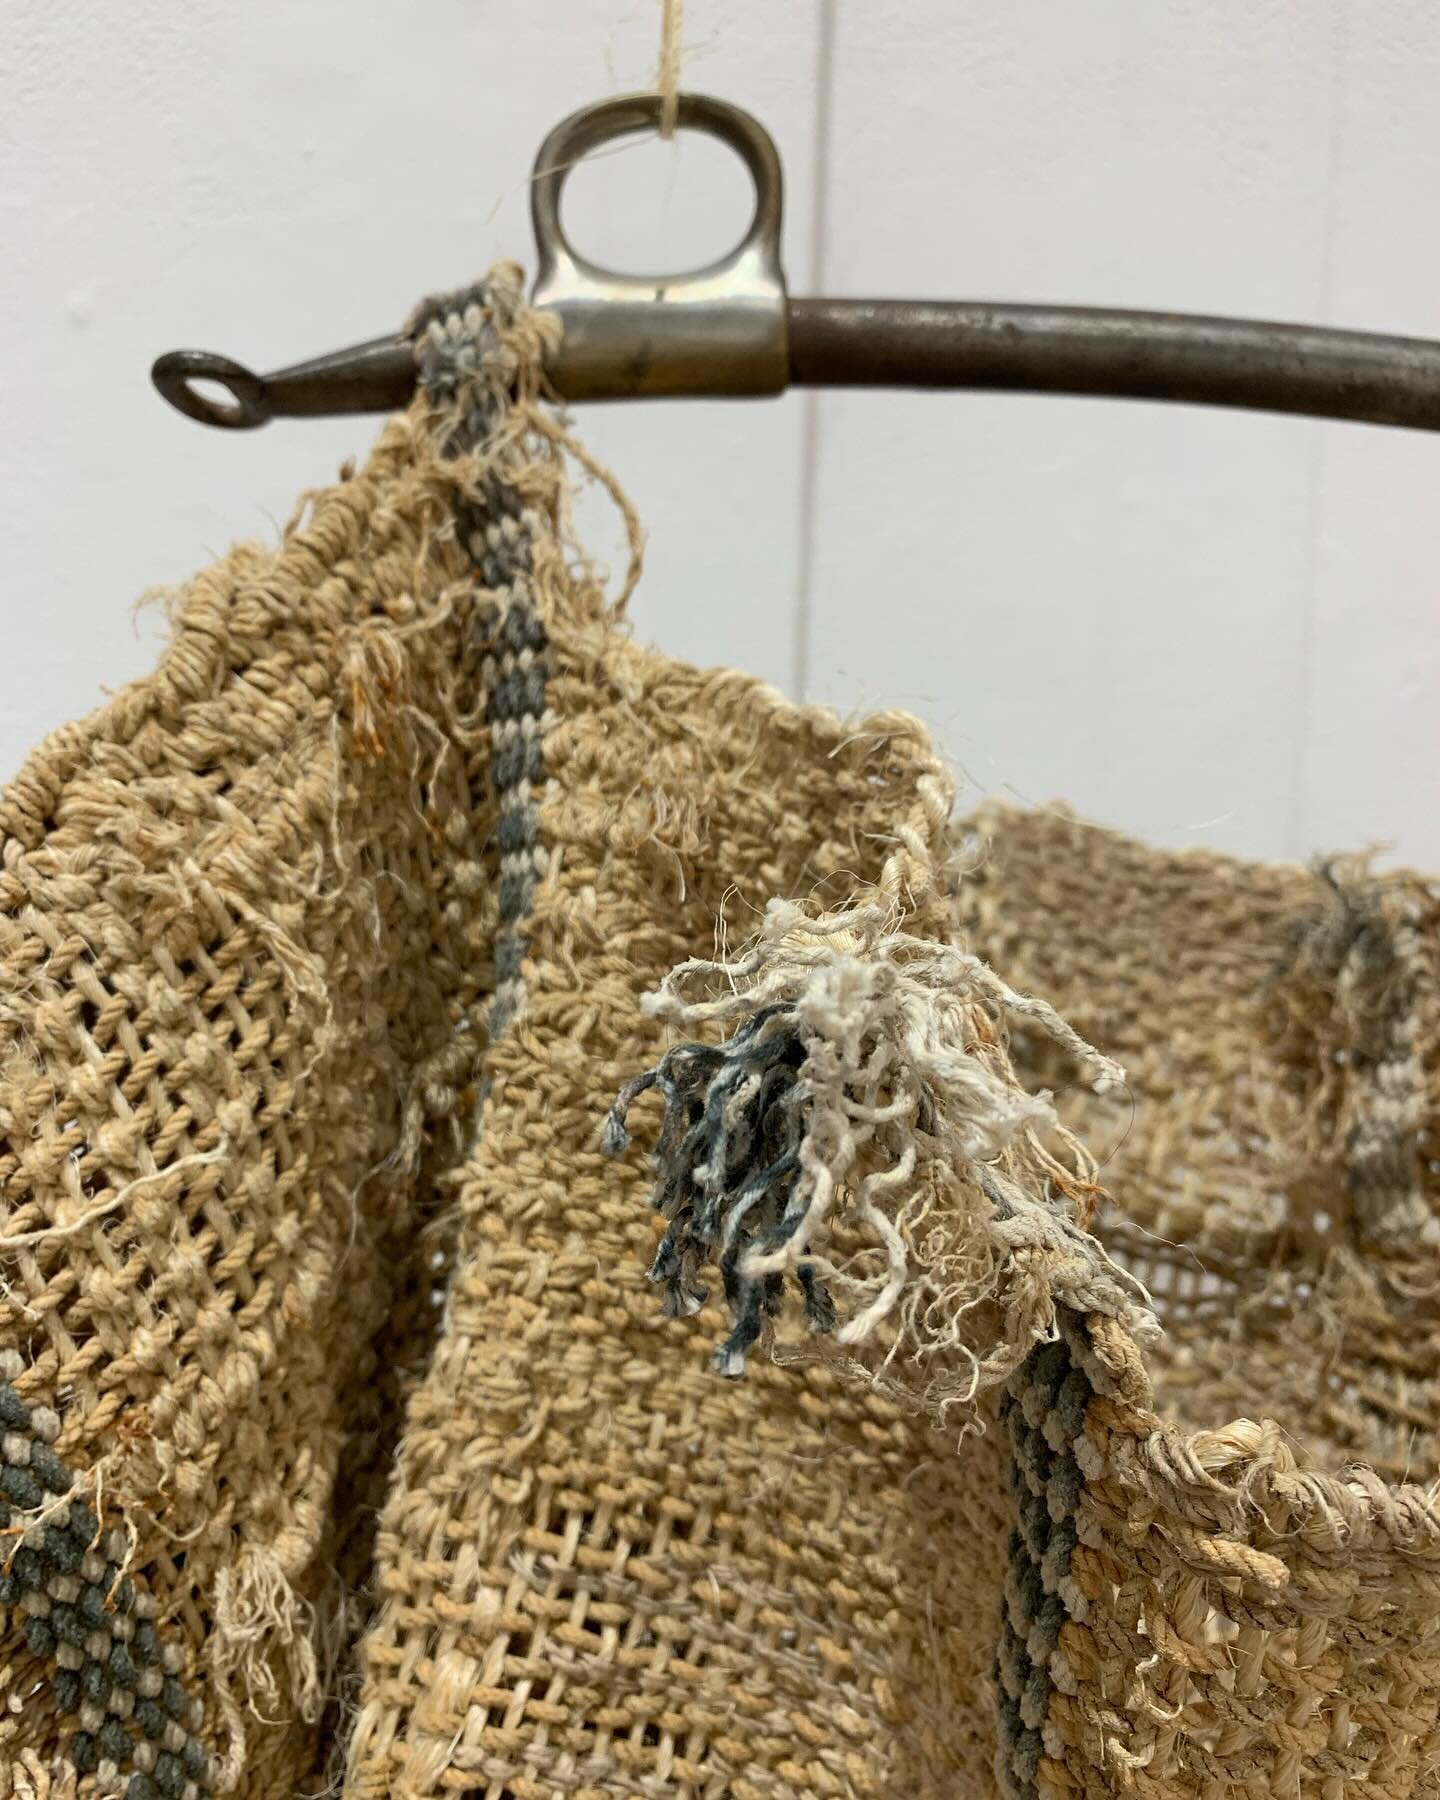 Amy Usdin &ldquo;Thoughts and Prayers&rdquo; plant fibers woven onto vintage horse fly nets.

On exhibit through May 18, the gallery is open Thursdays- Saturdays 12-6pm

What Fierce Looks Like: The Artists of the Women&rsquo;s Art Institute curated b